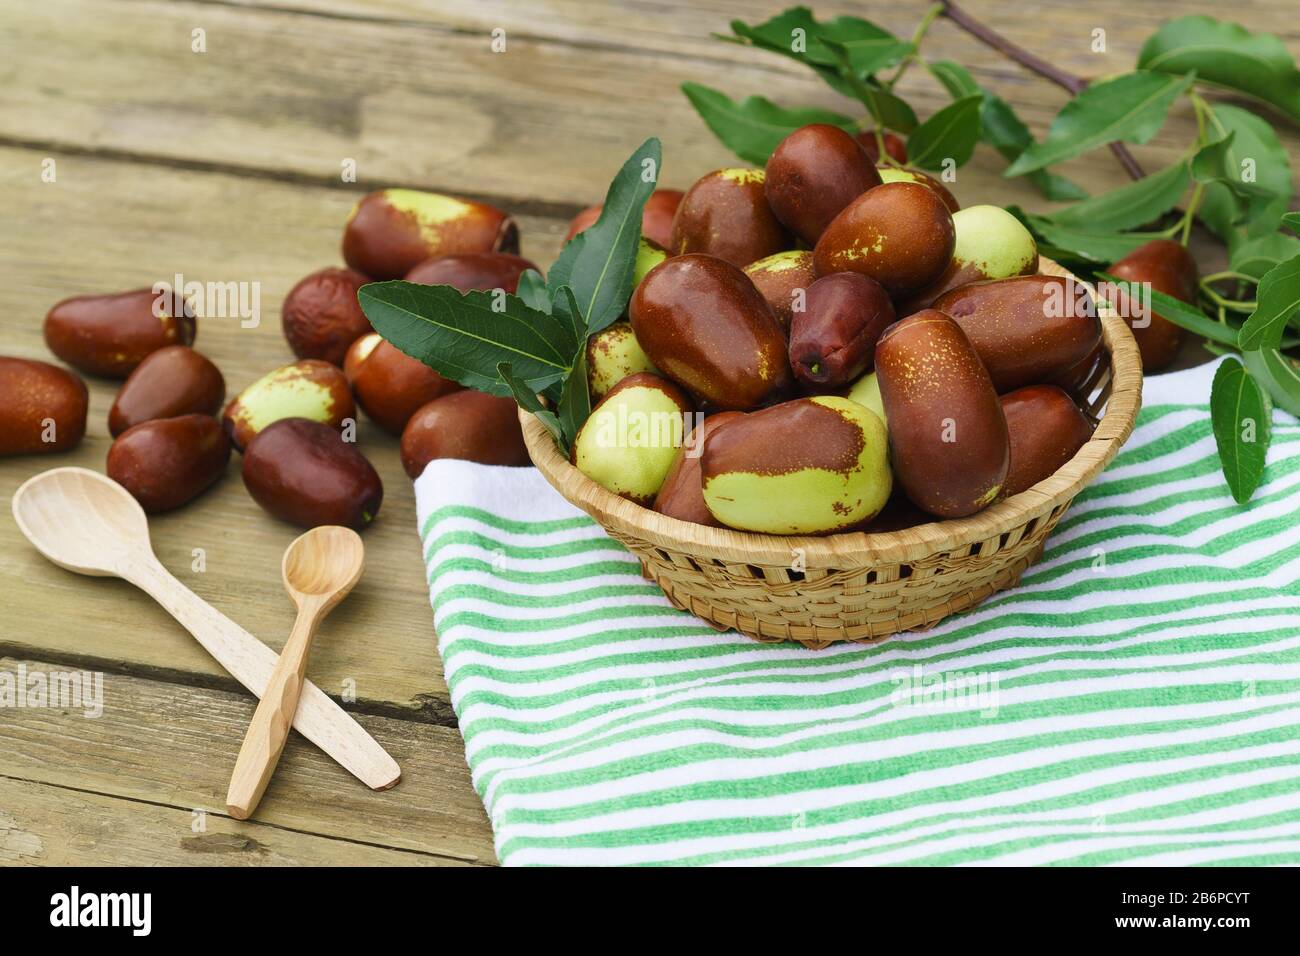 Braided Cup with ripe fruits of the jujube (lat. Ziziphus jujuba) on an old wooden table. Two wooden spoons and a striped napkin Stock Photo